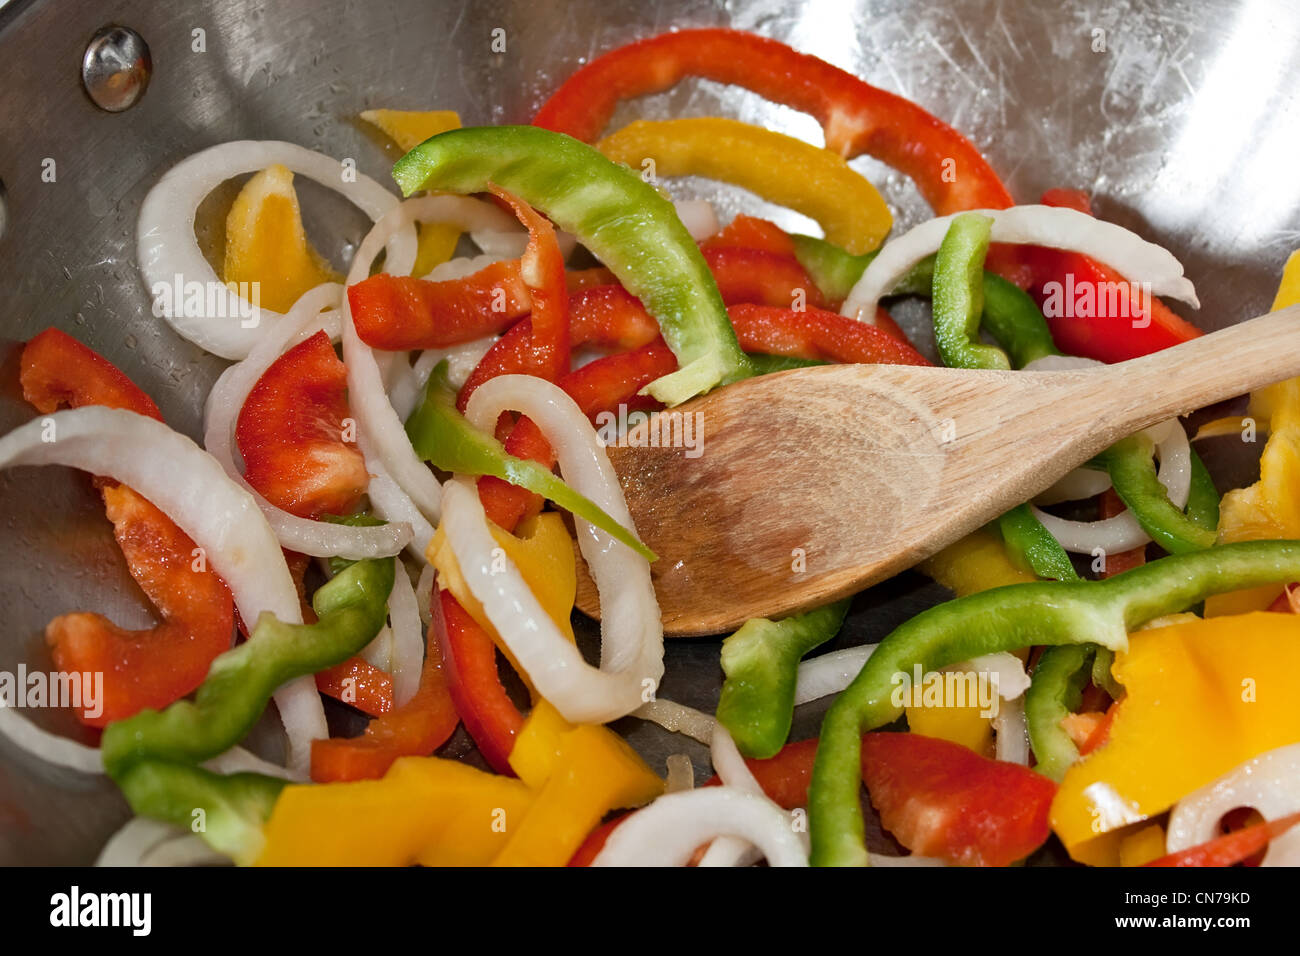 Closeup of sliced peppers and onions being stir fried in a stainless steel wok pan. Stock Photo